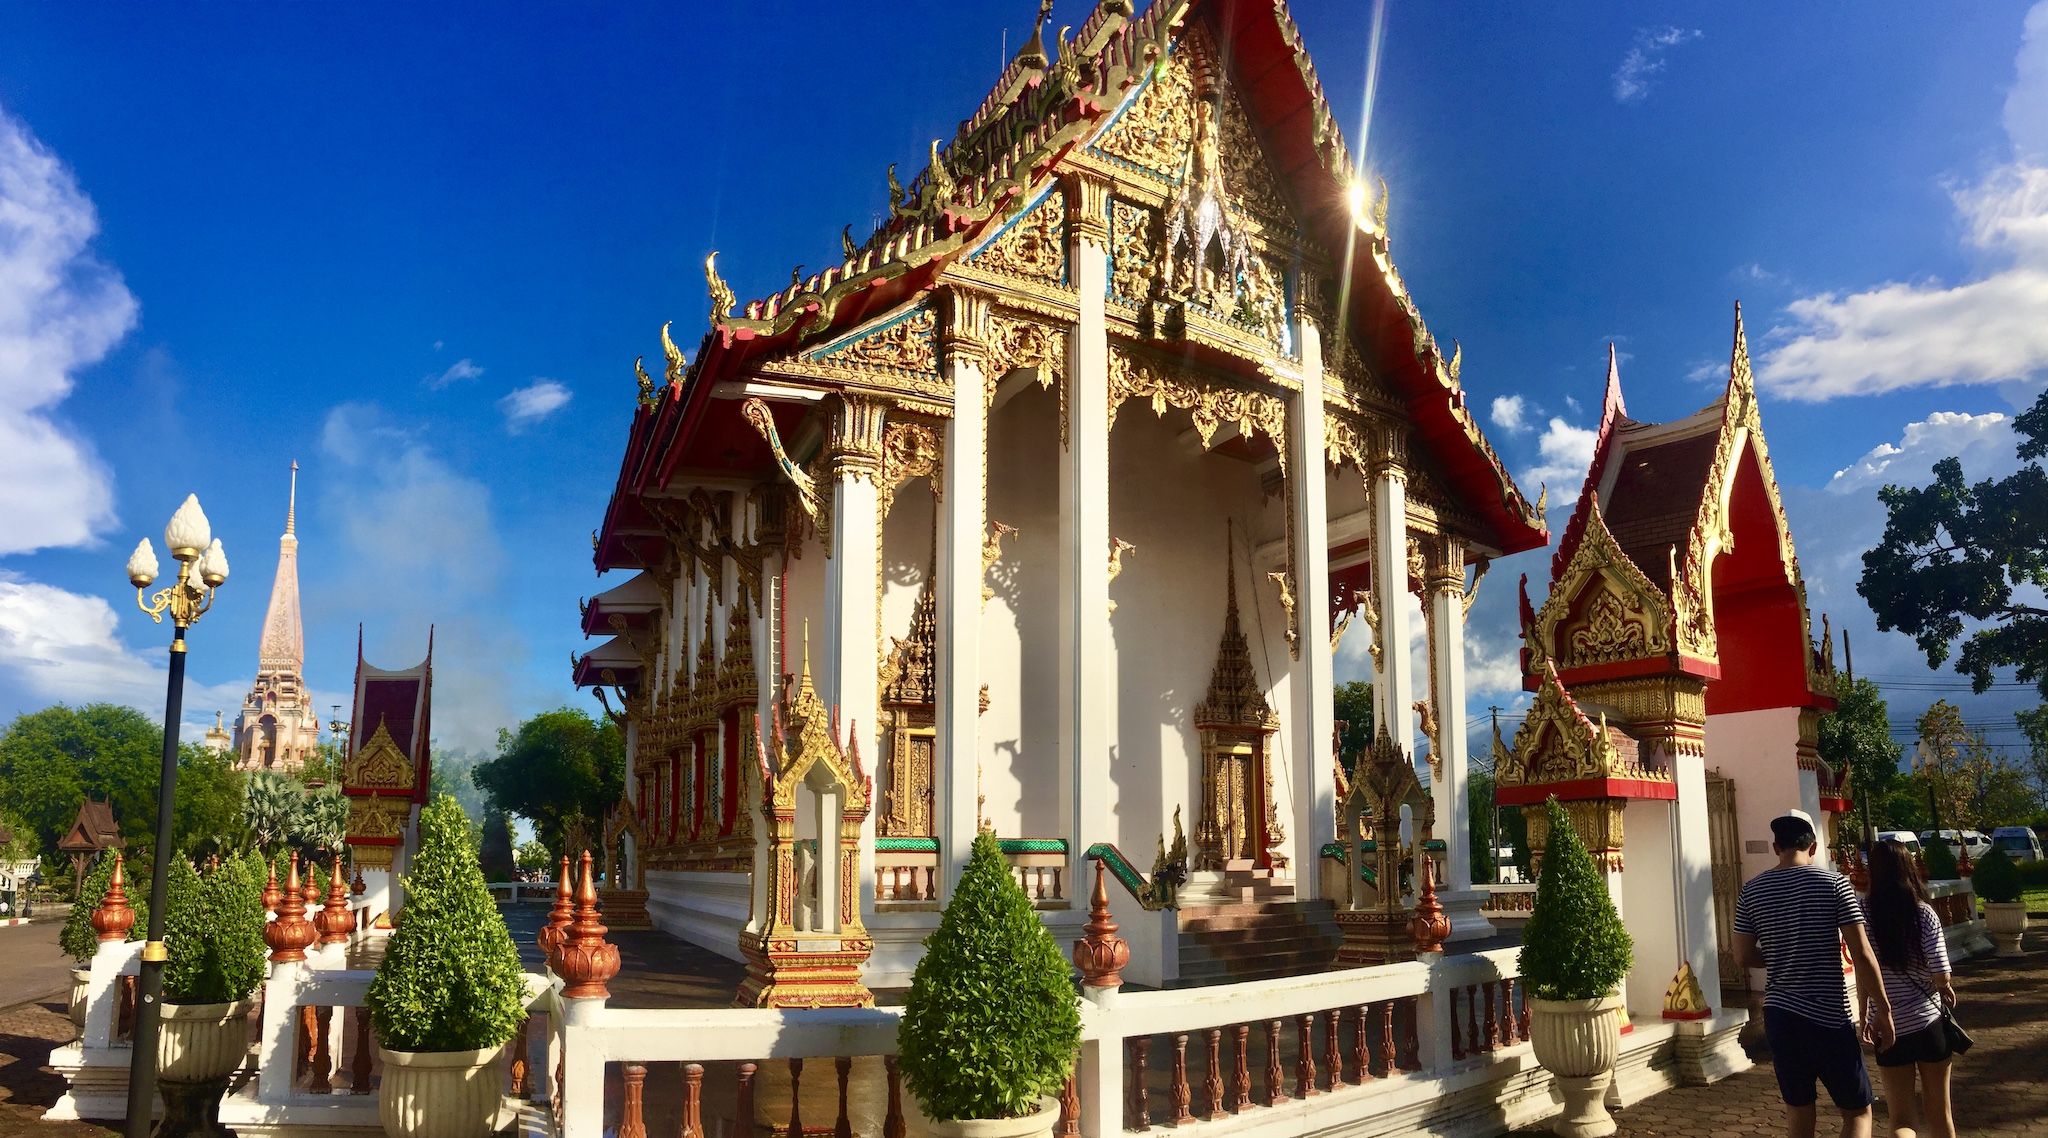 Wat Chalong is the largest and most important temple on Phuket. Photo: Sascha Tegtmeyer